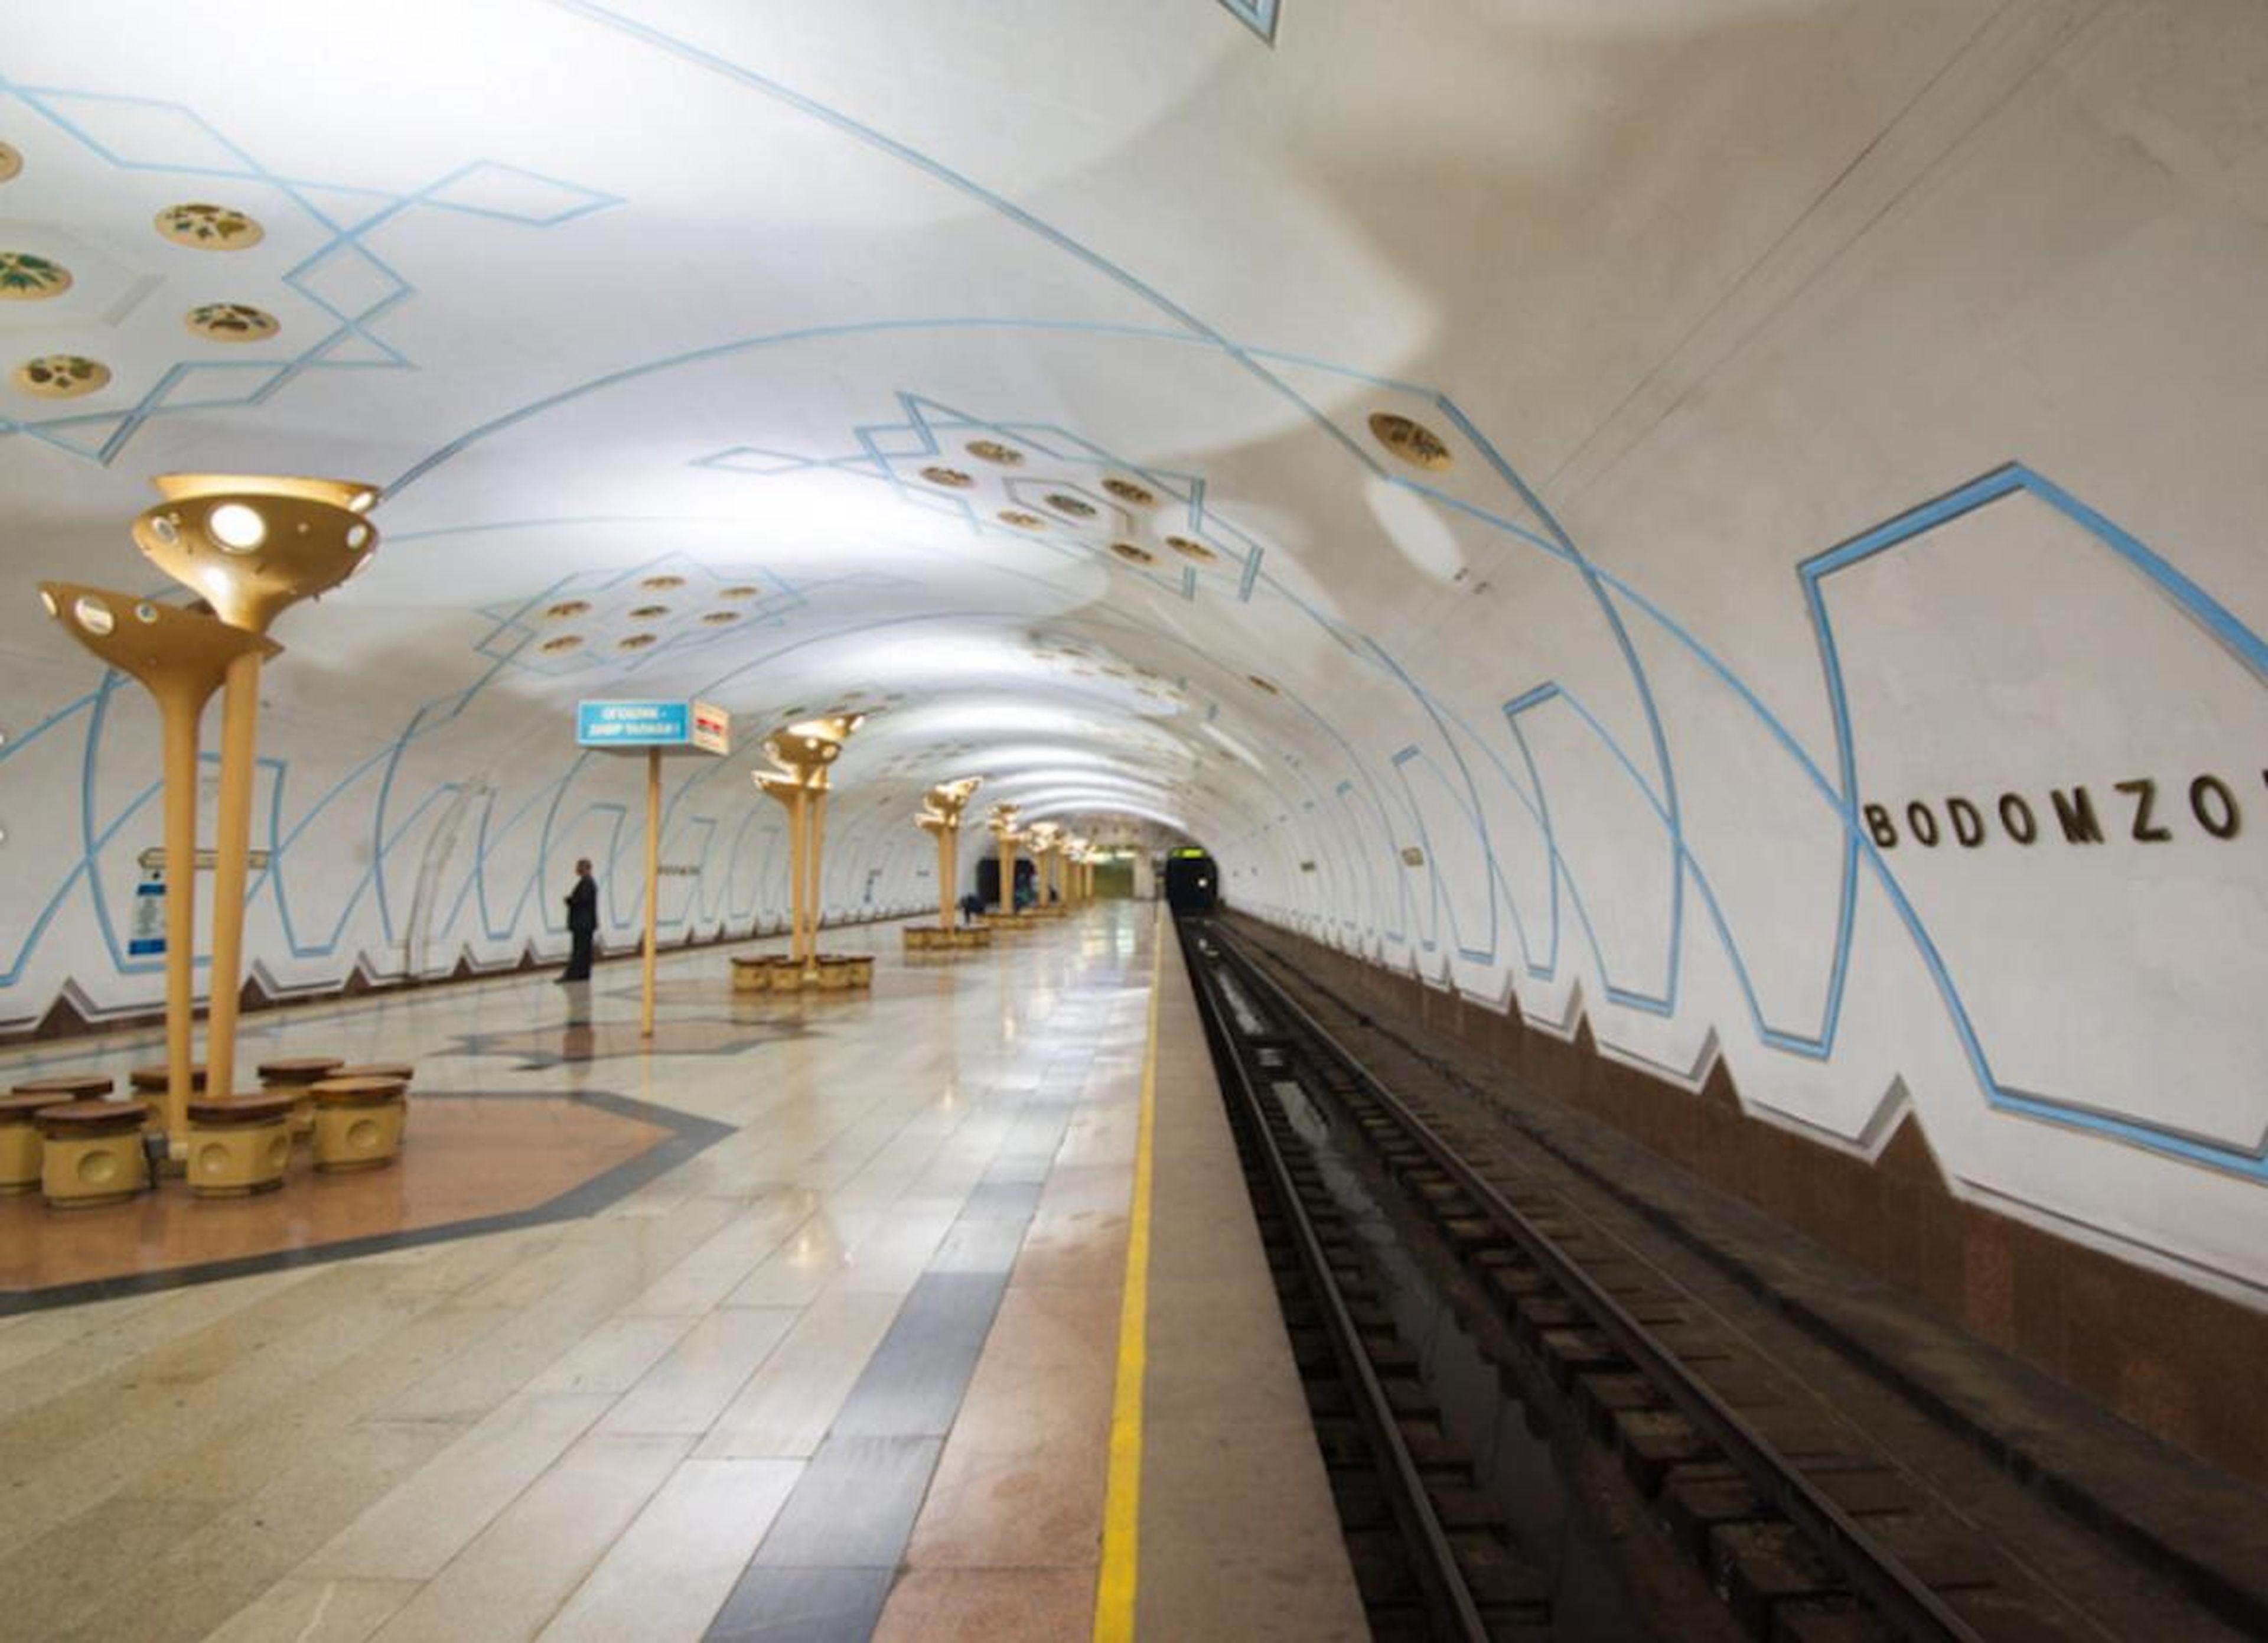 It has three lines, and its 29 stations are decorated in different stunning styles.